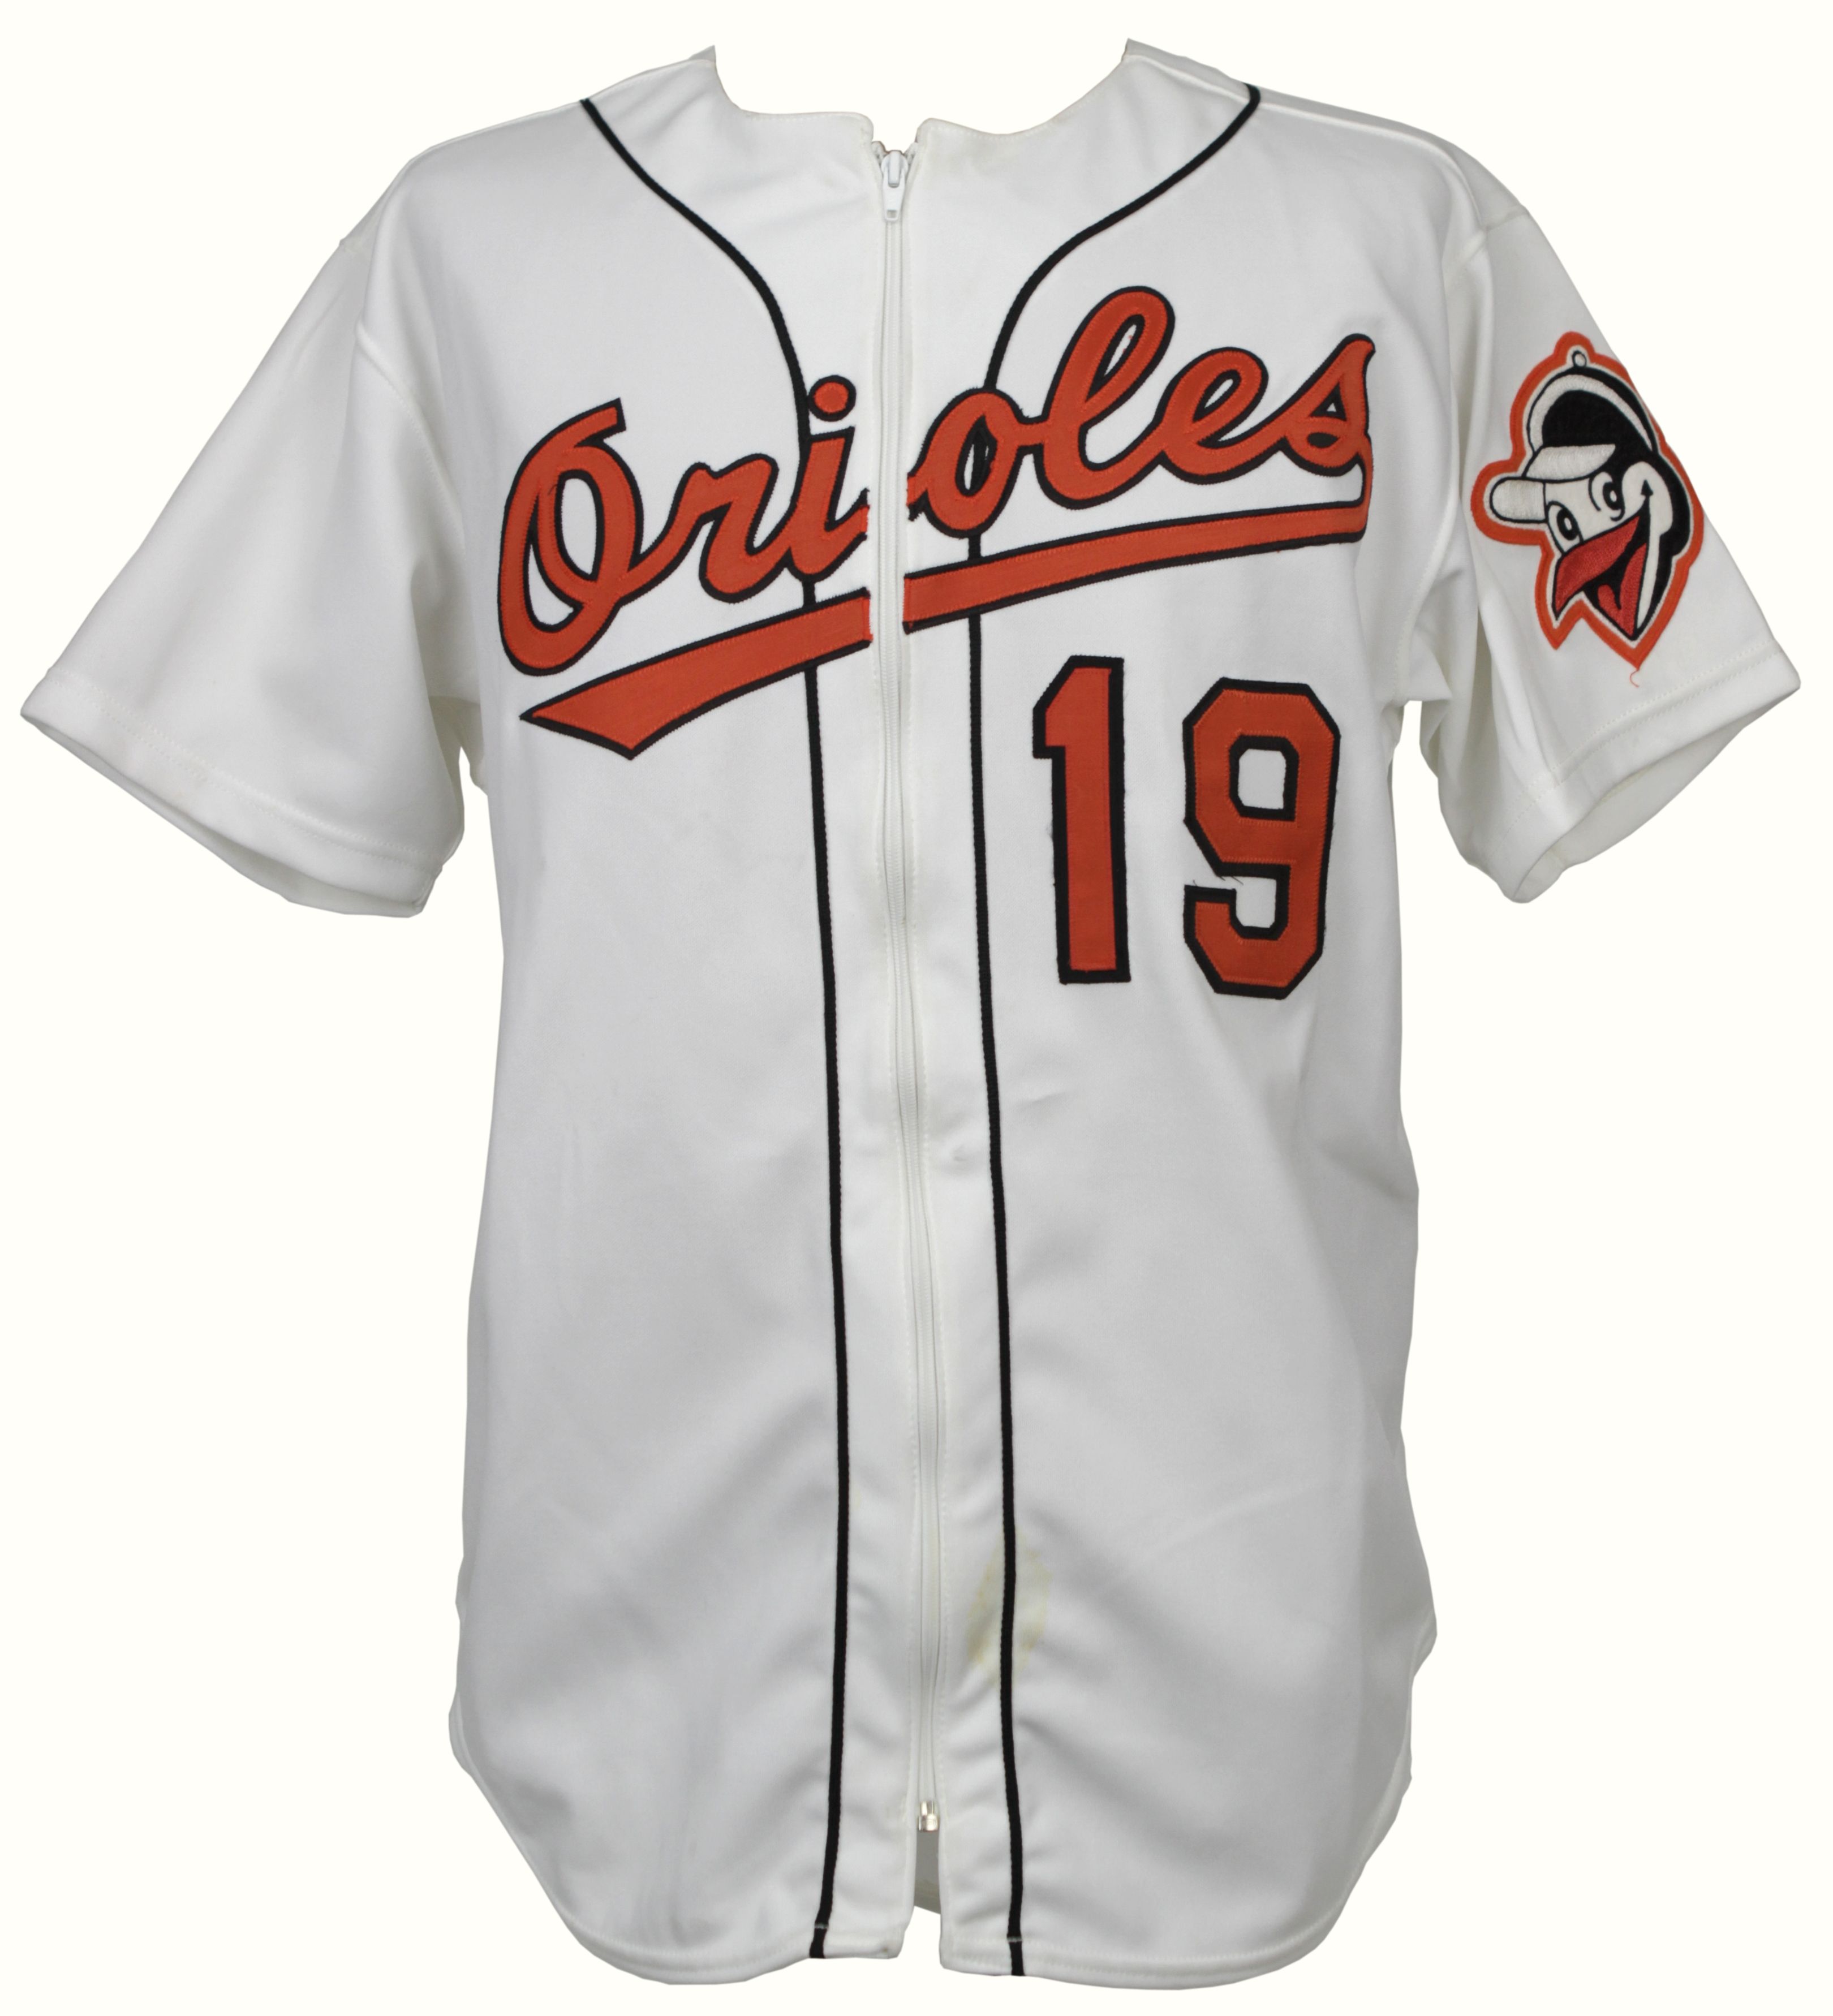 baltimore orioles jersey auction